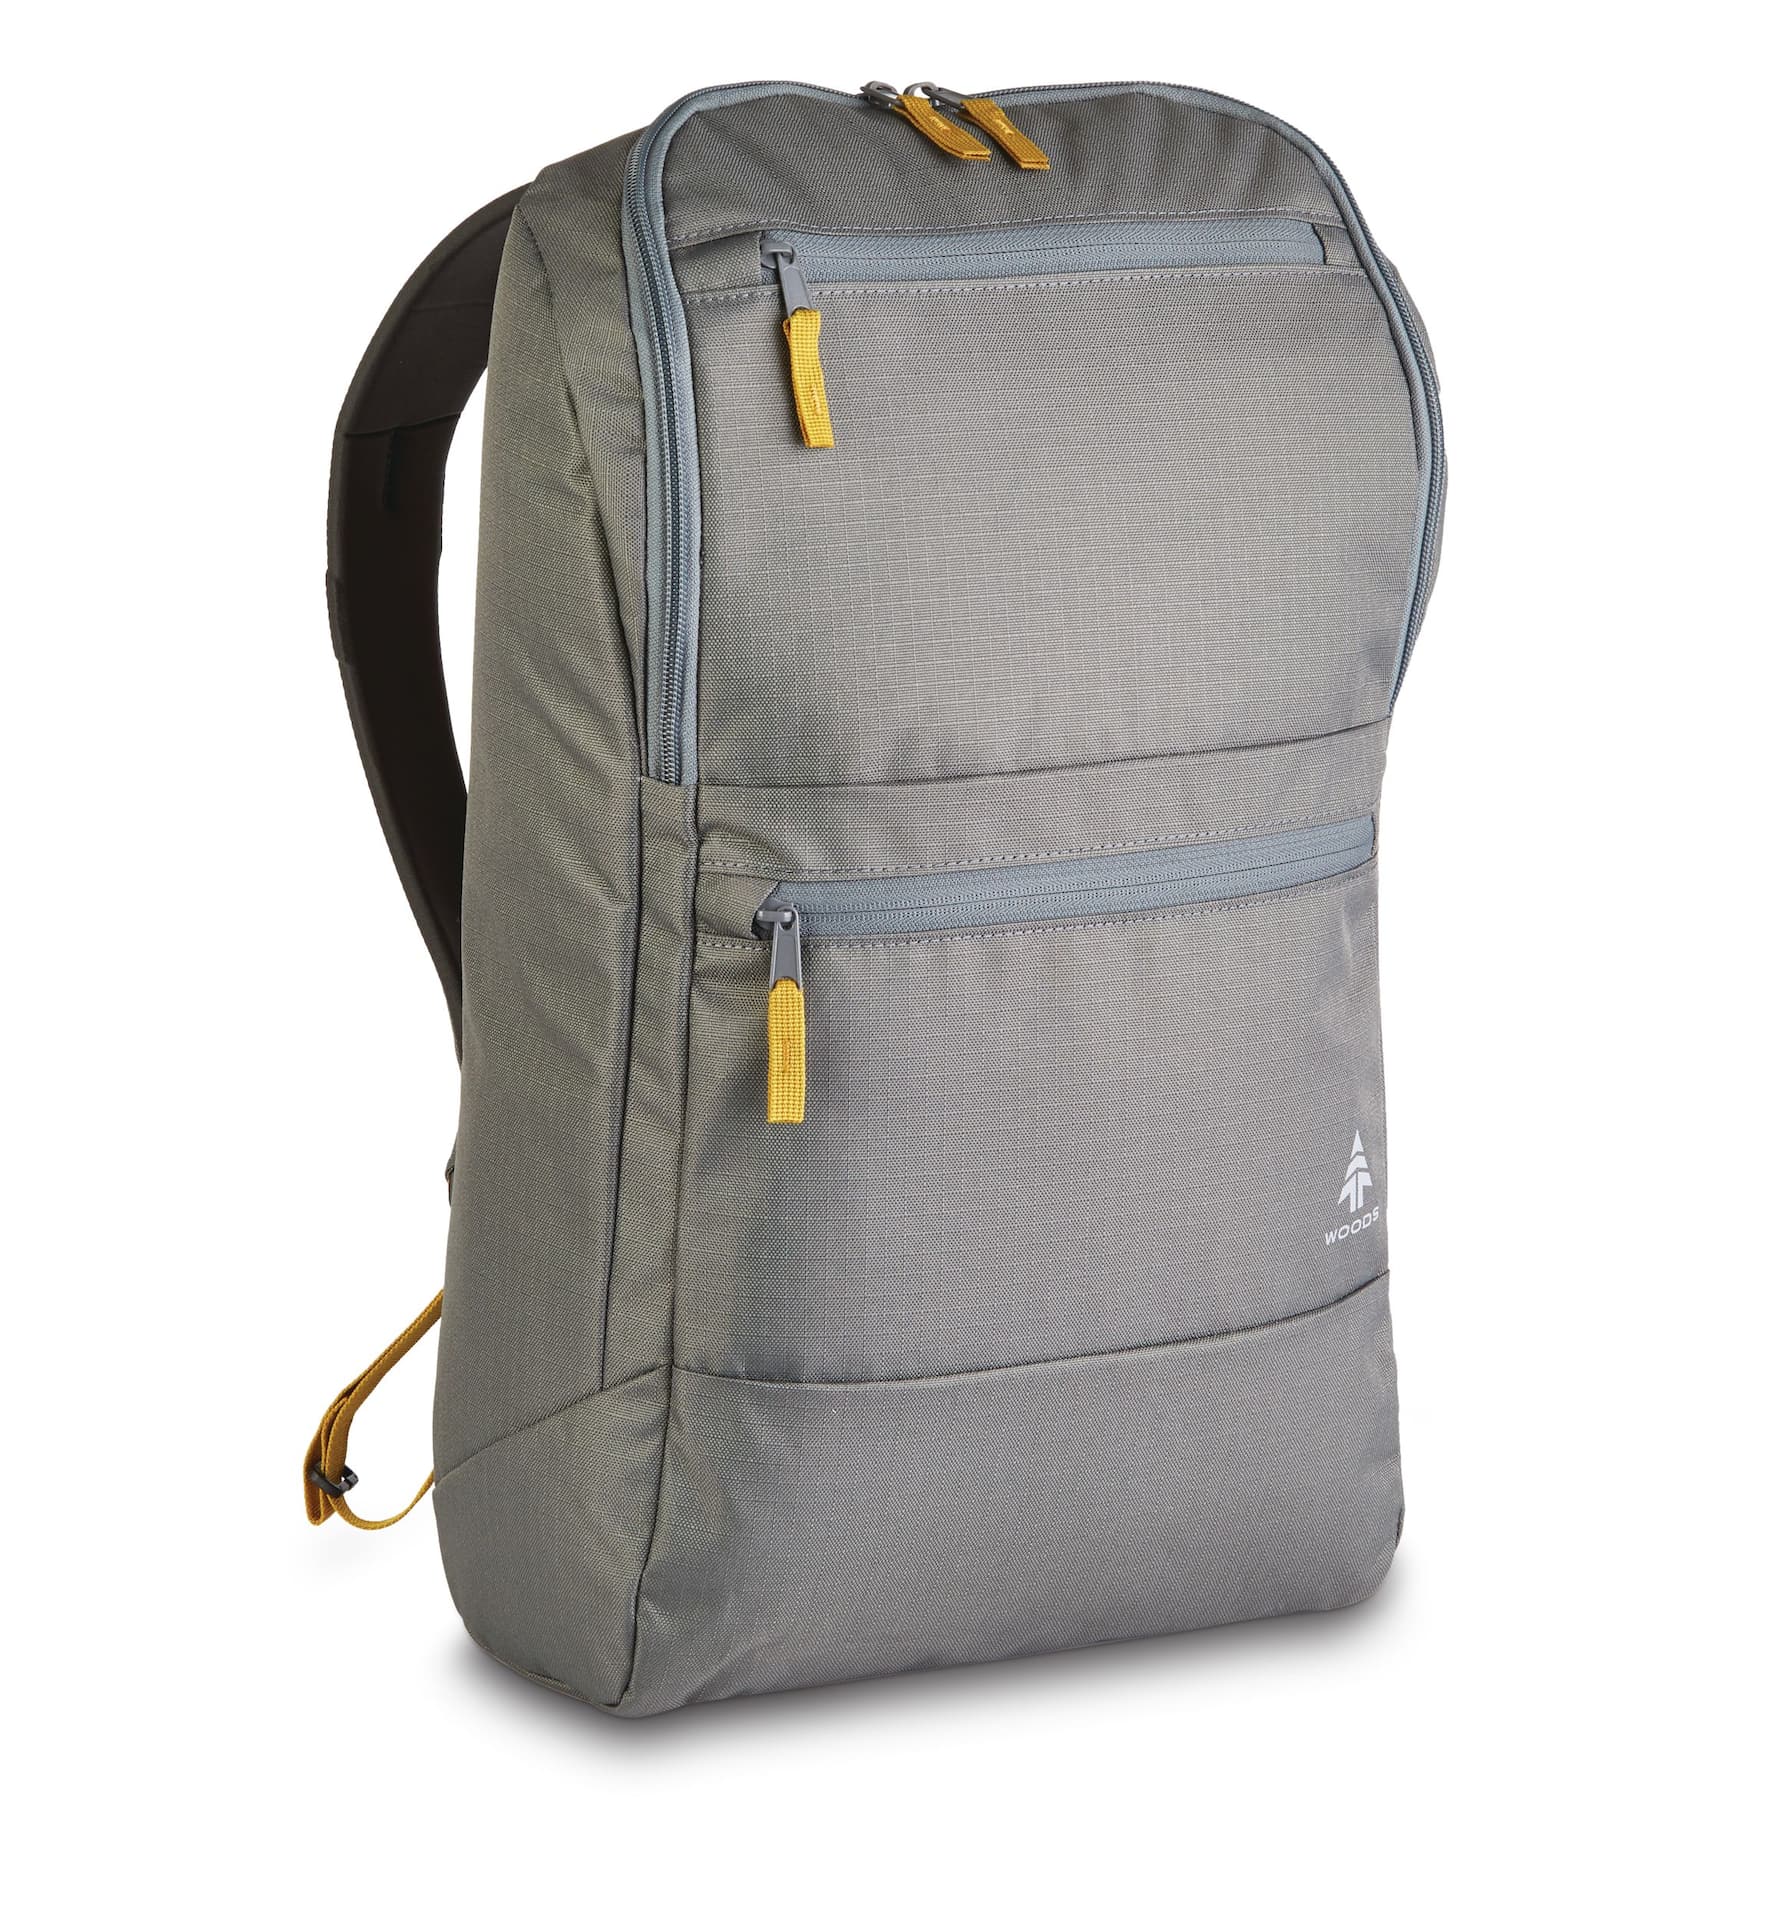 Woods Commuter Daypack, Recycled Compact Laptop Backpack For Travel ...